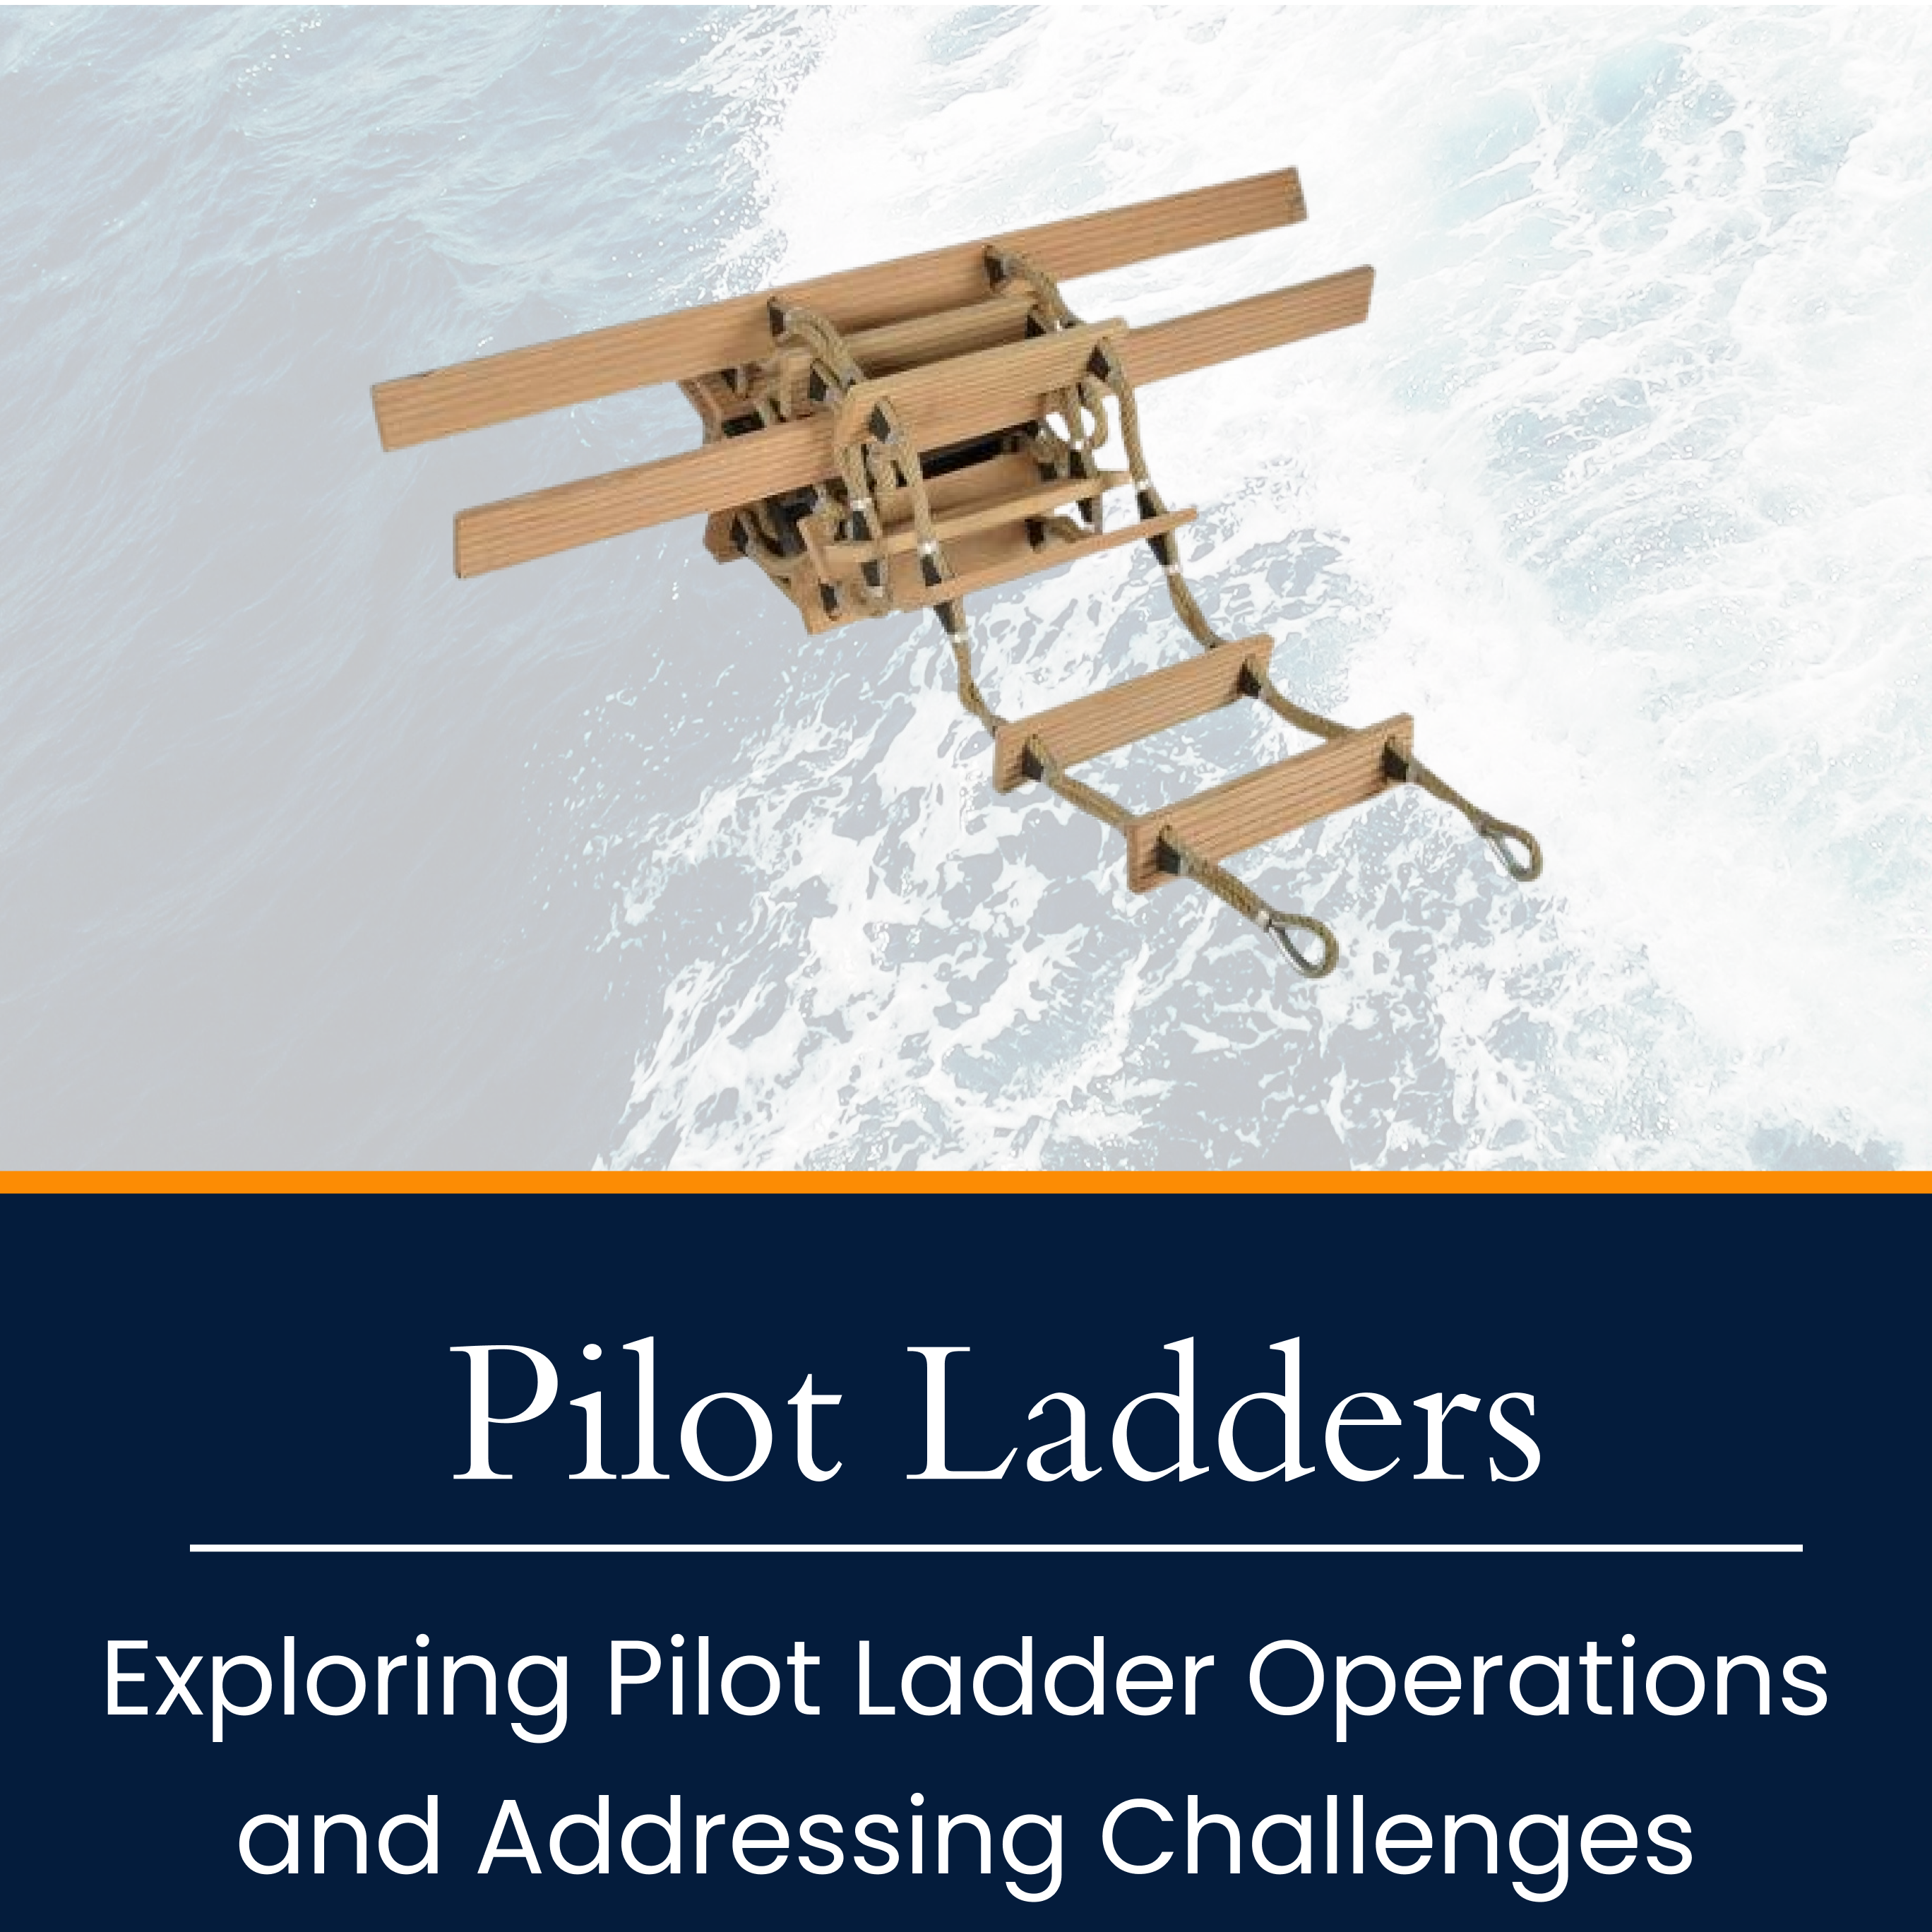 Keeping Your Crew Safe: Exploring Pilot Ladder Operations and Addressing Equipment Challenges